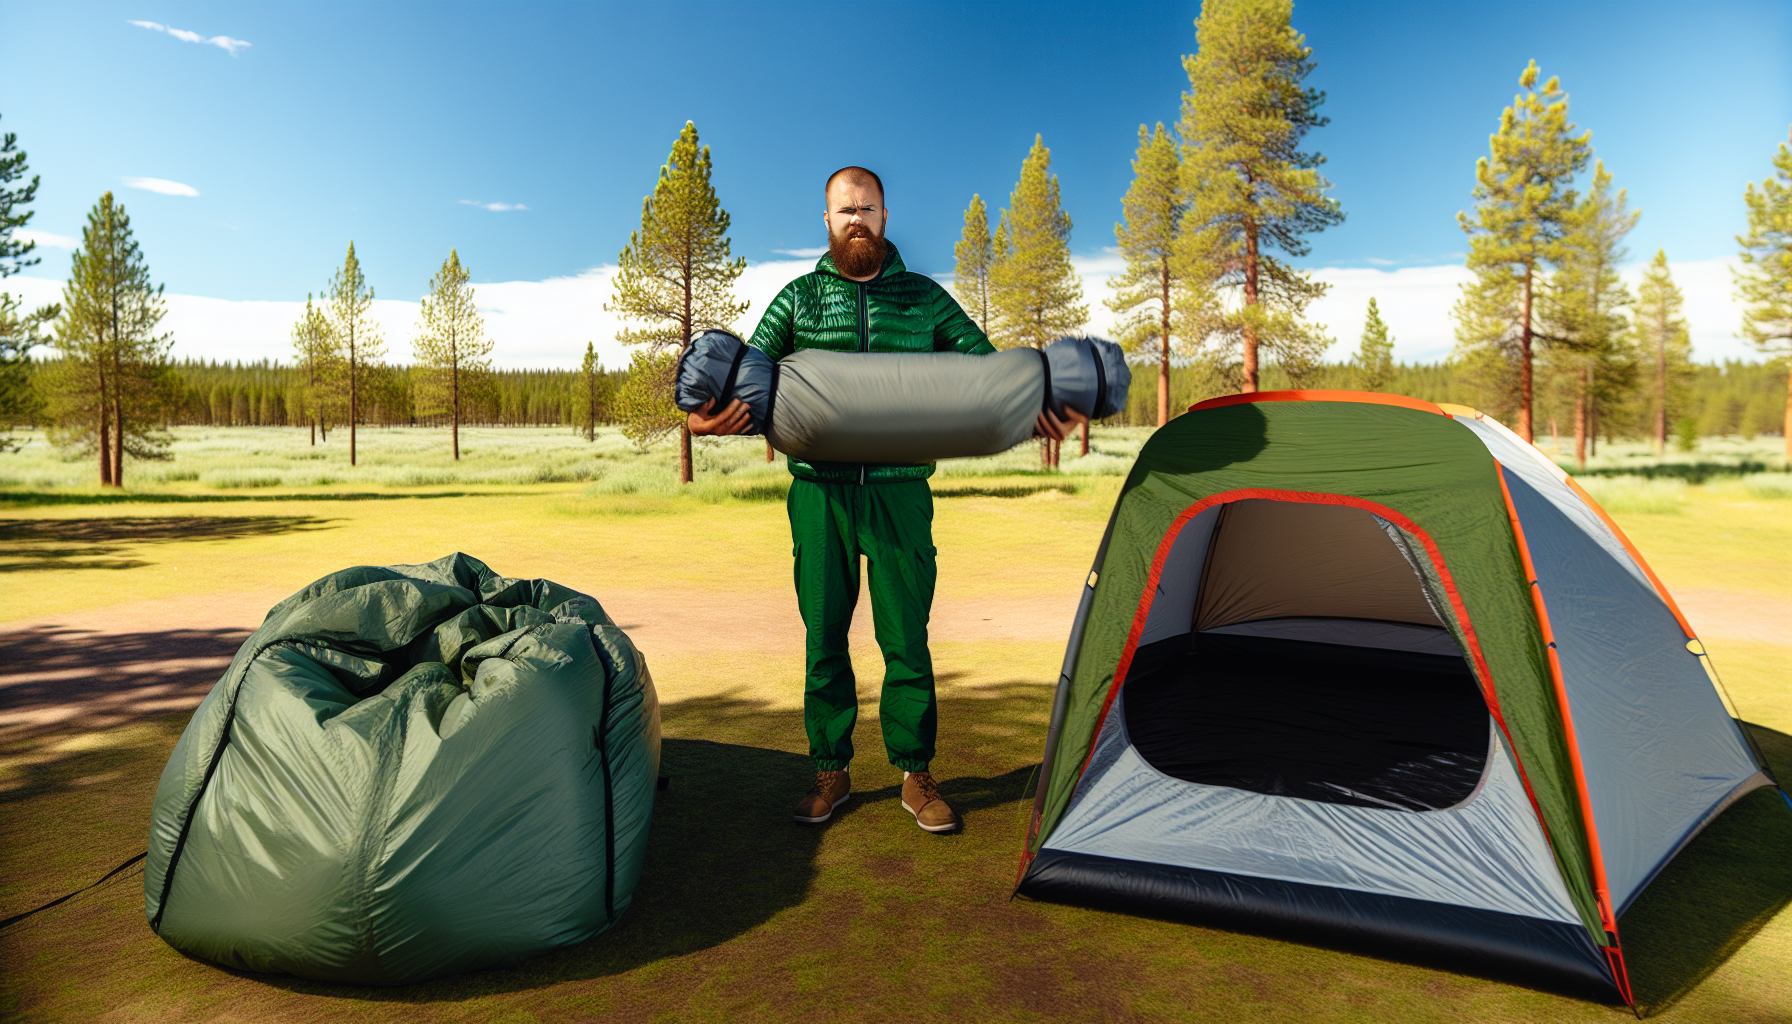 Comparing the portability of inflatable tents and traditional pole tents